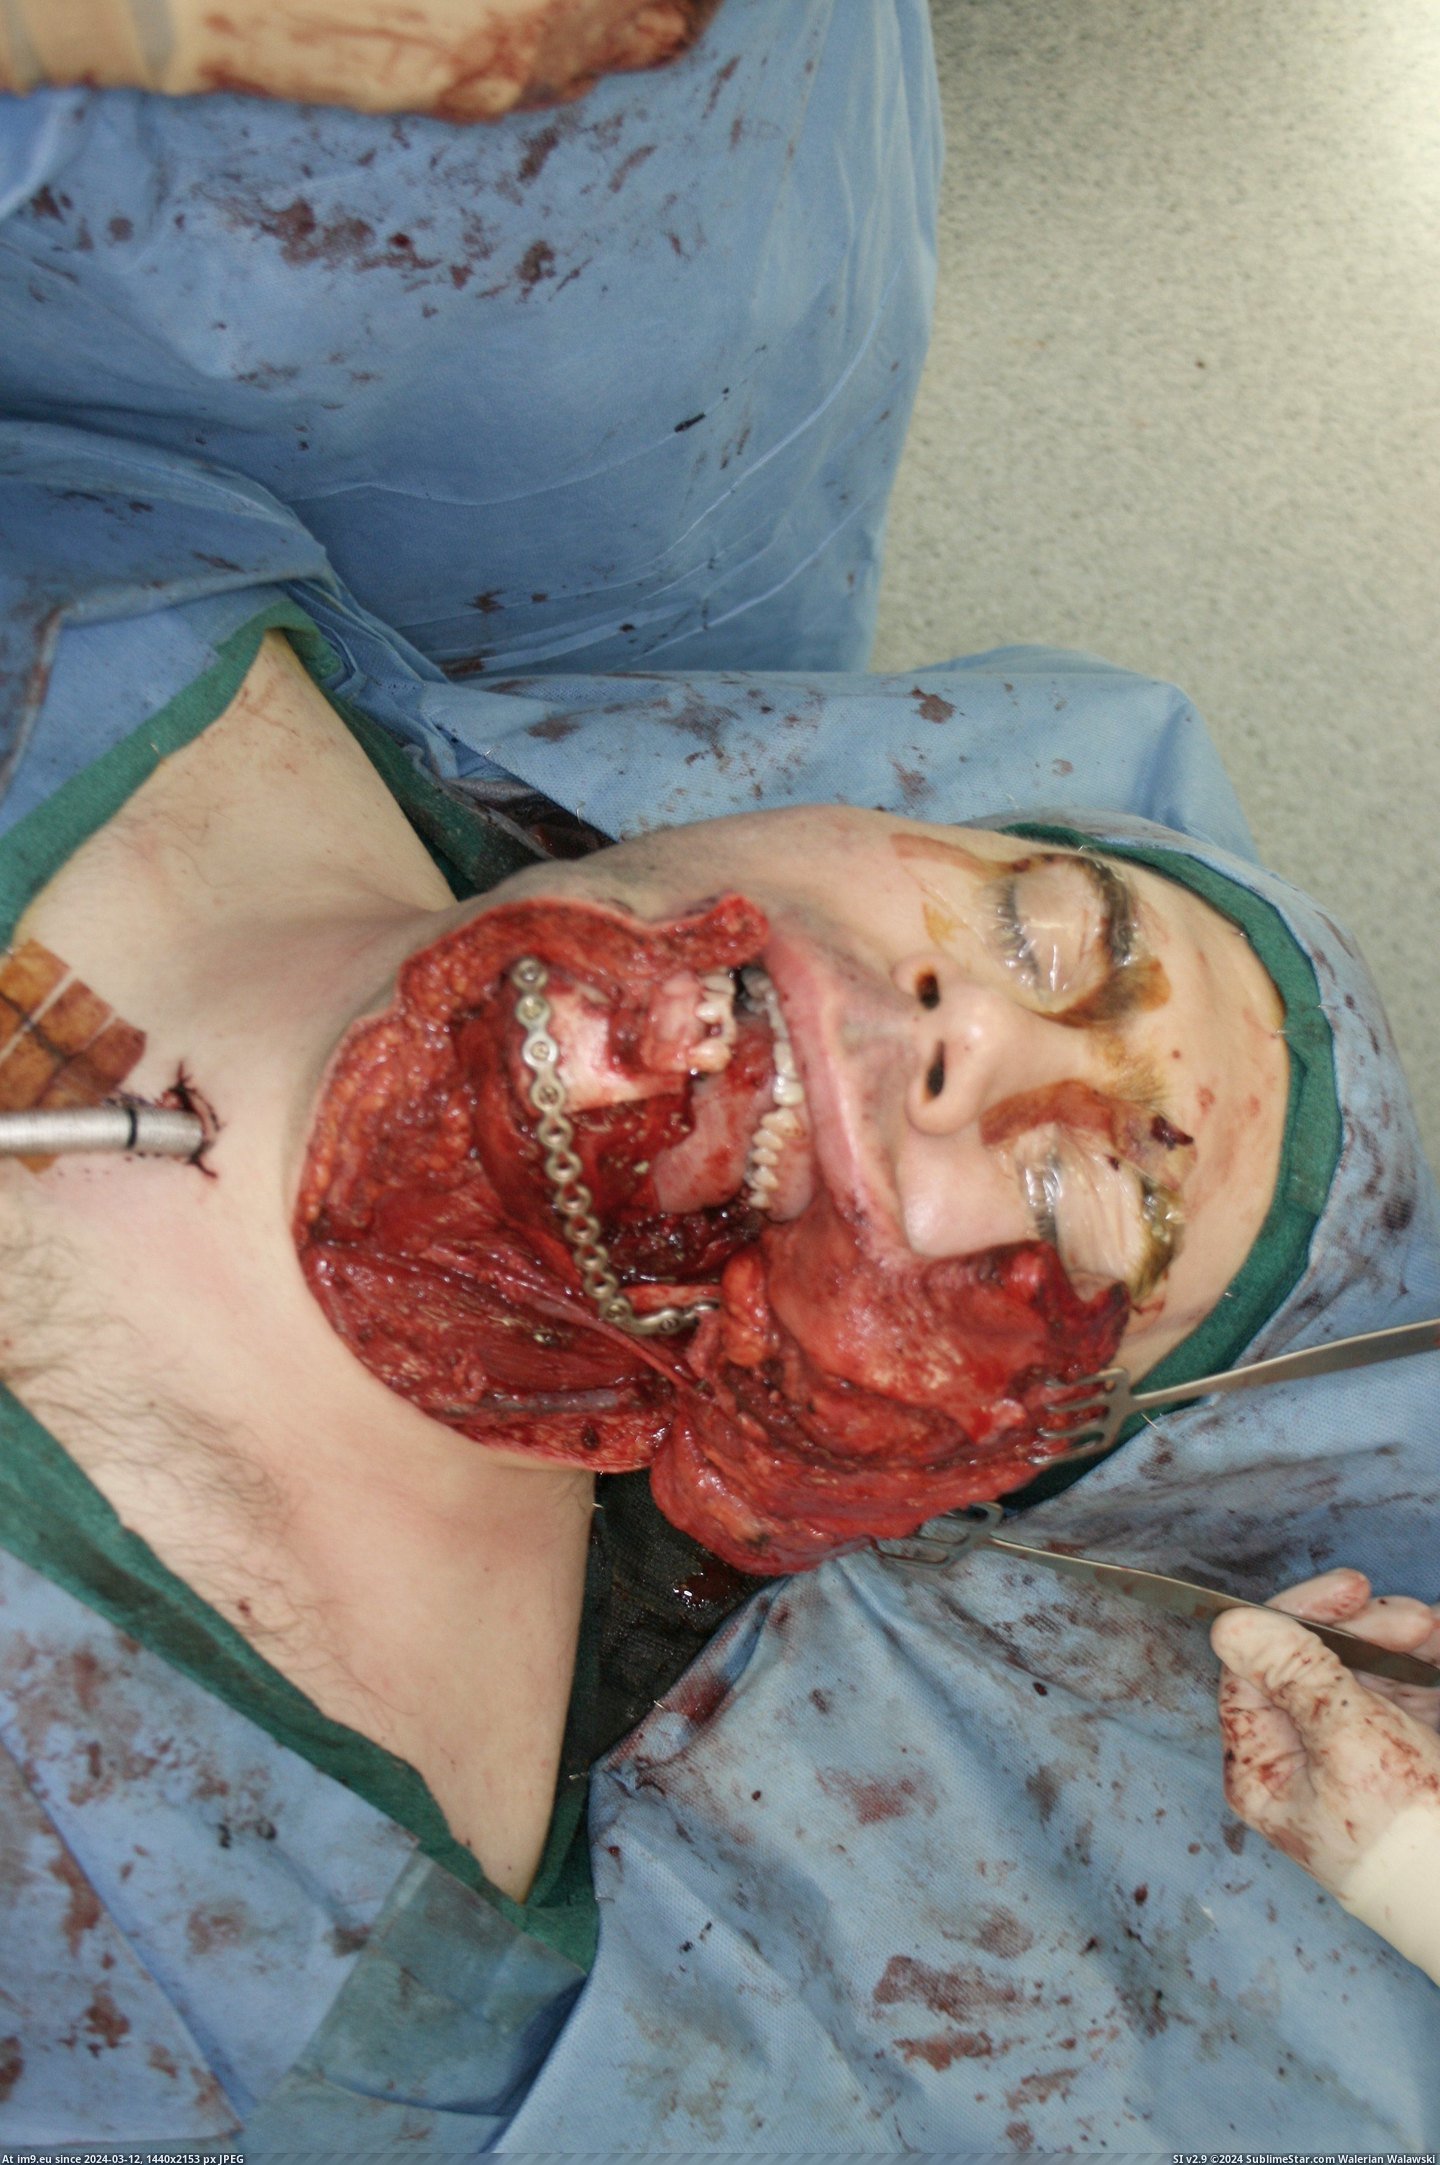 #Wtf #Surgery #Cancer #Oral [Wtf] Oral Cancer Surgery 3 Pic. (Image of album My r/WTF favs))